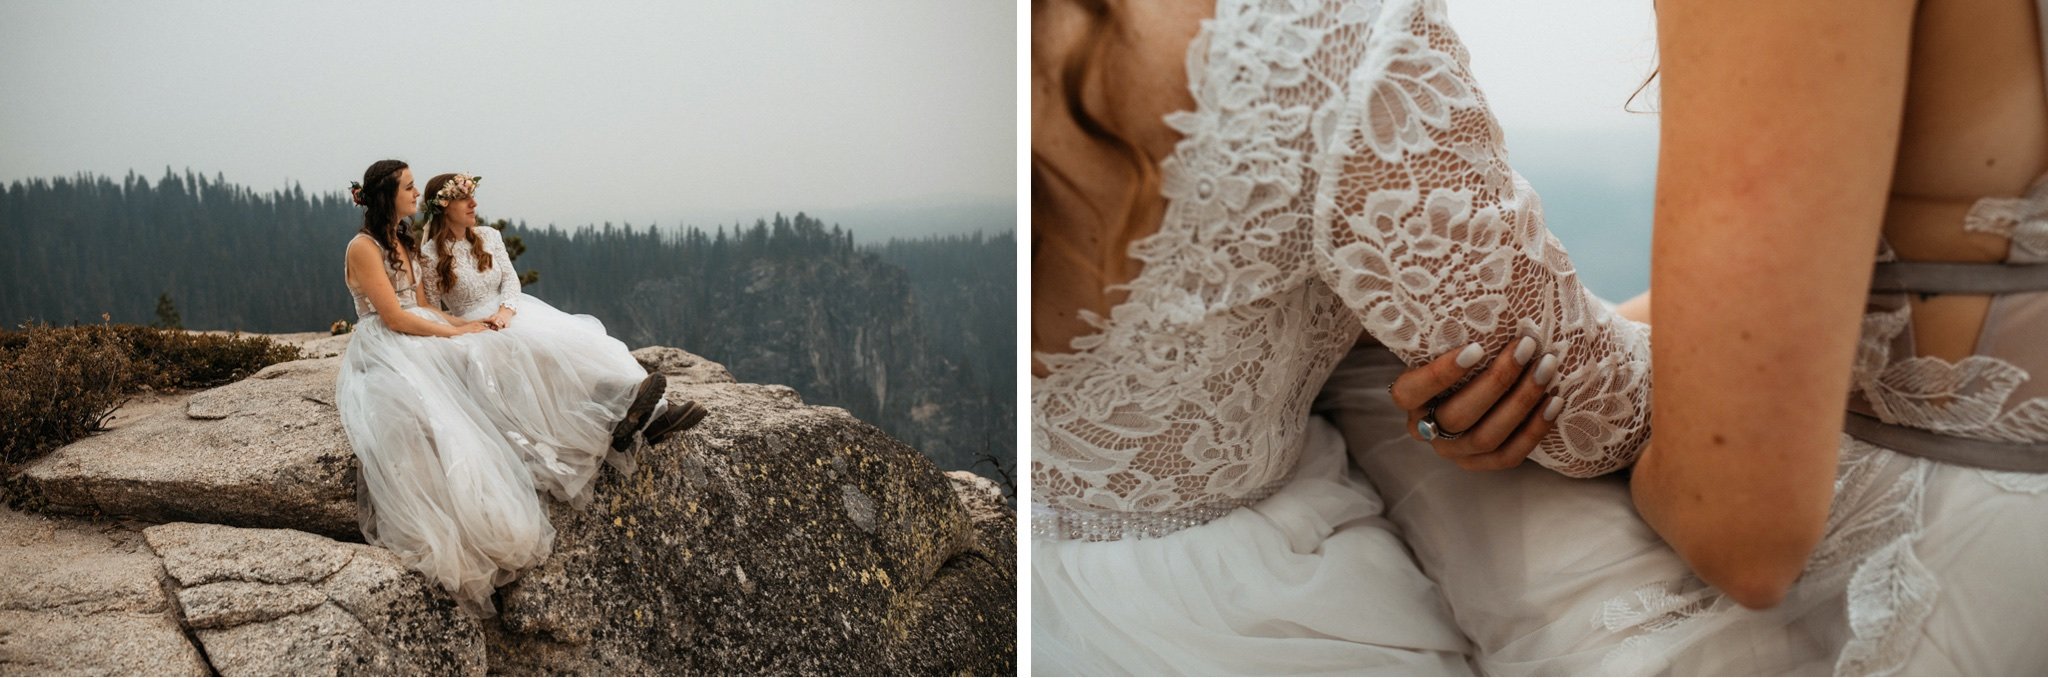 Yosemite National Park Elopement with Two Brides-Will Khoury50.jpg